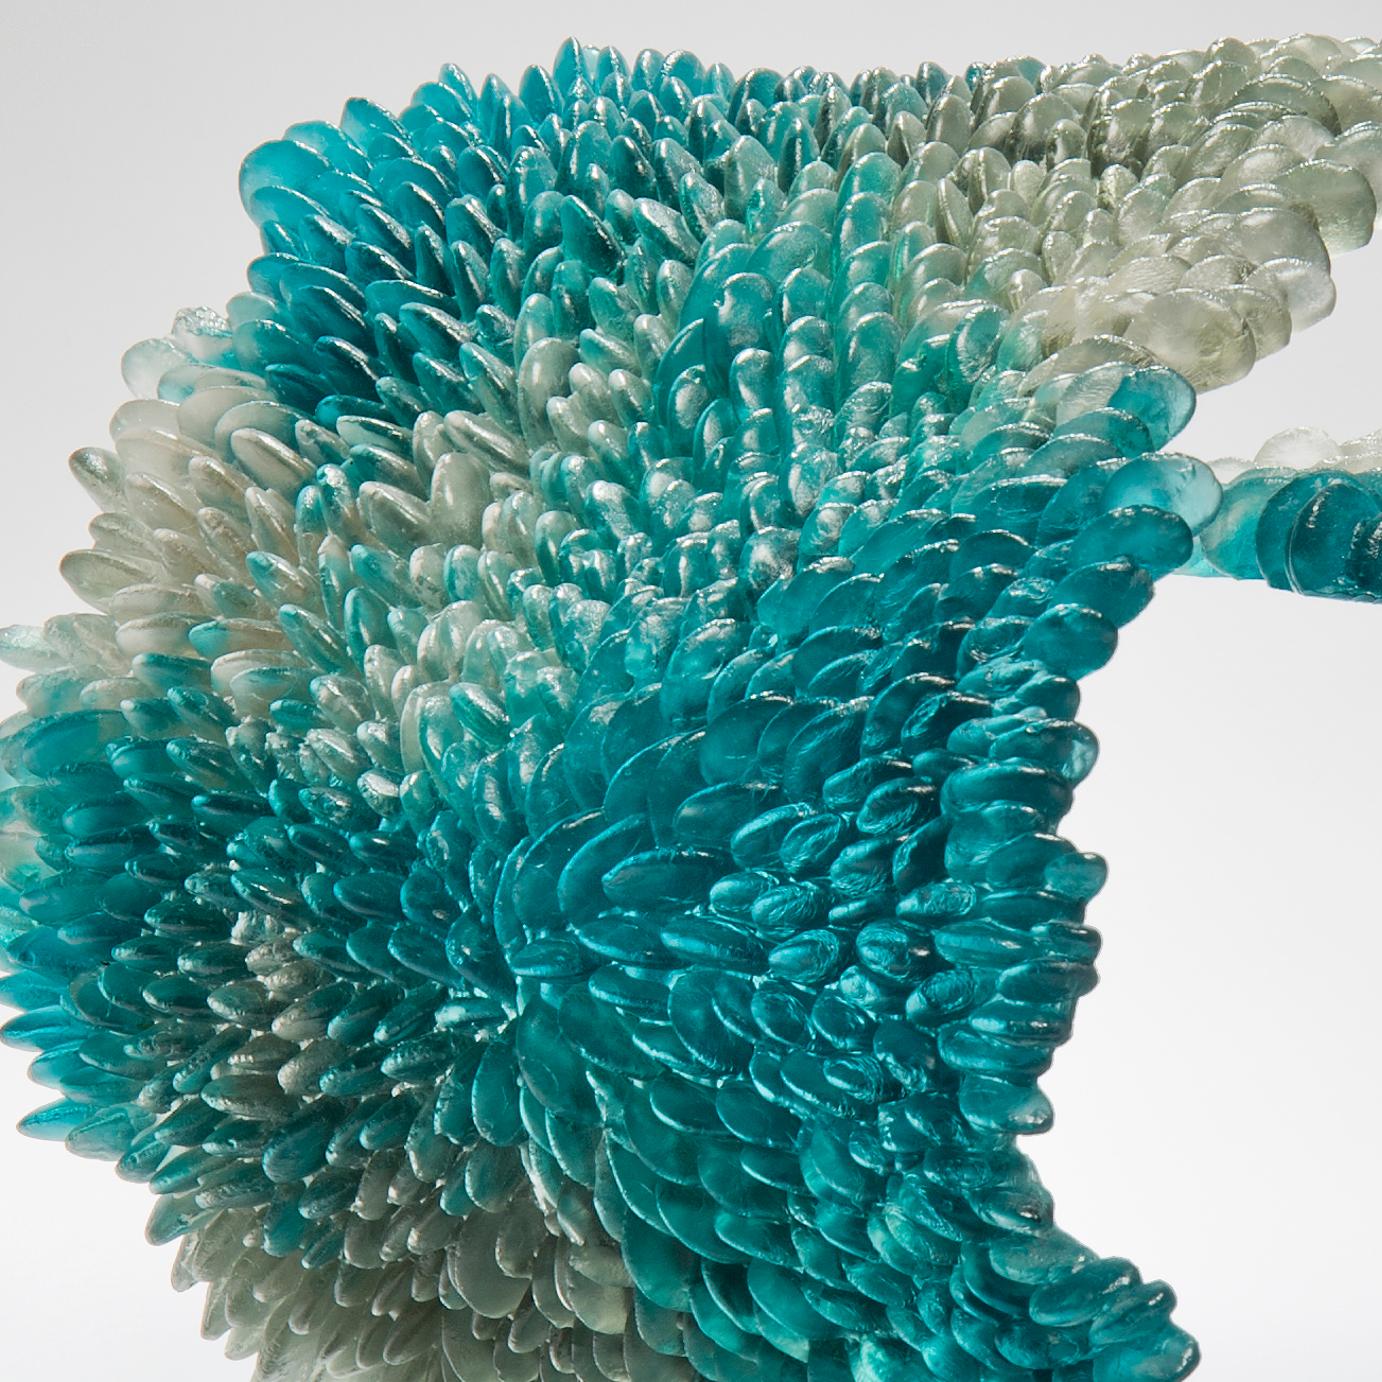 Cast Alliform II, a Unique Glass Sculpture in Clear and Teal by Nina Casson McGarva